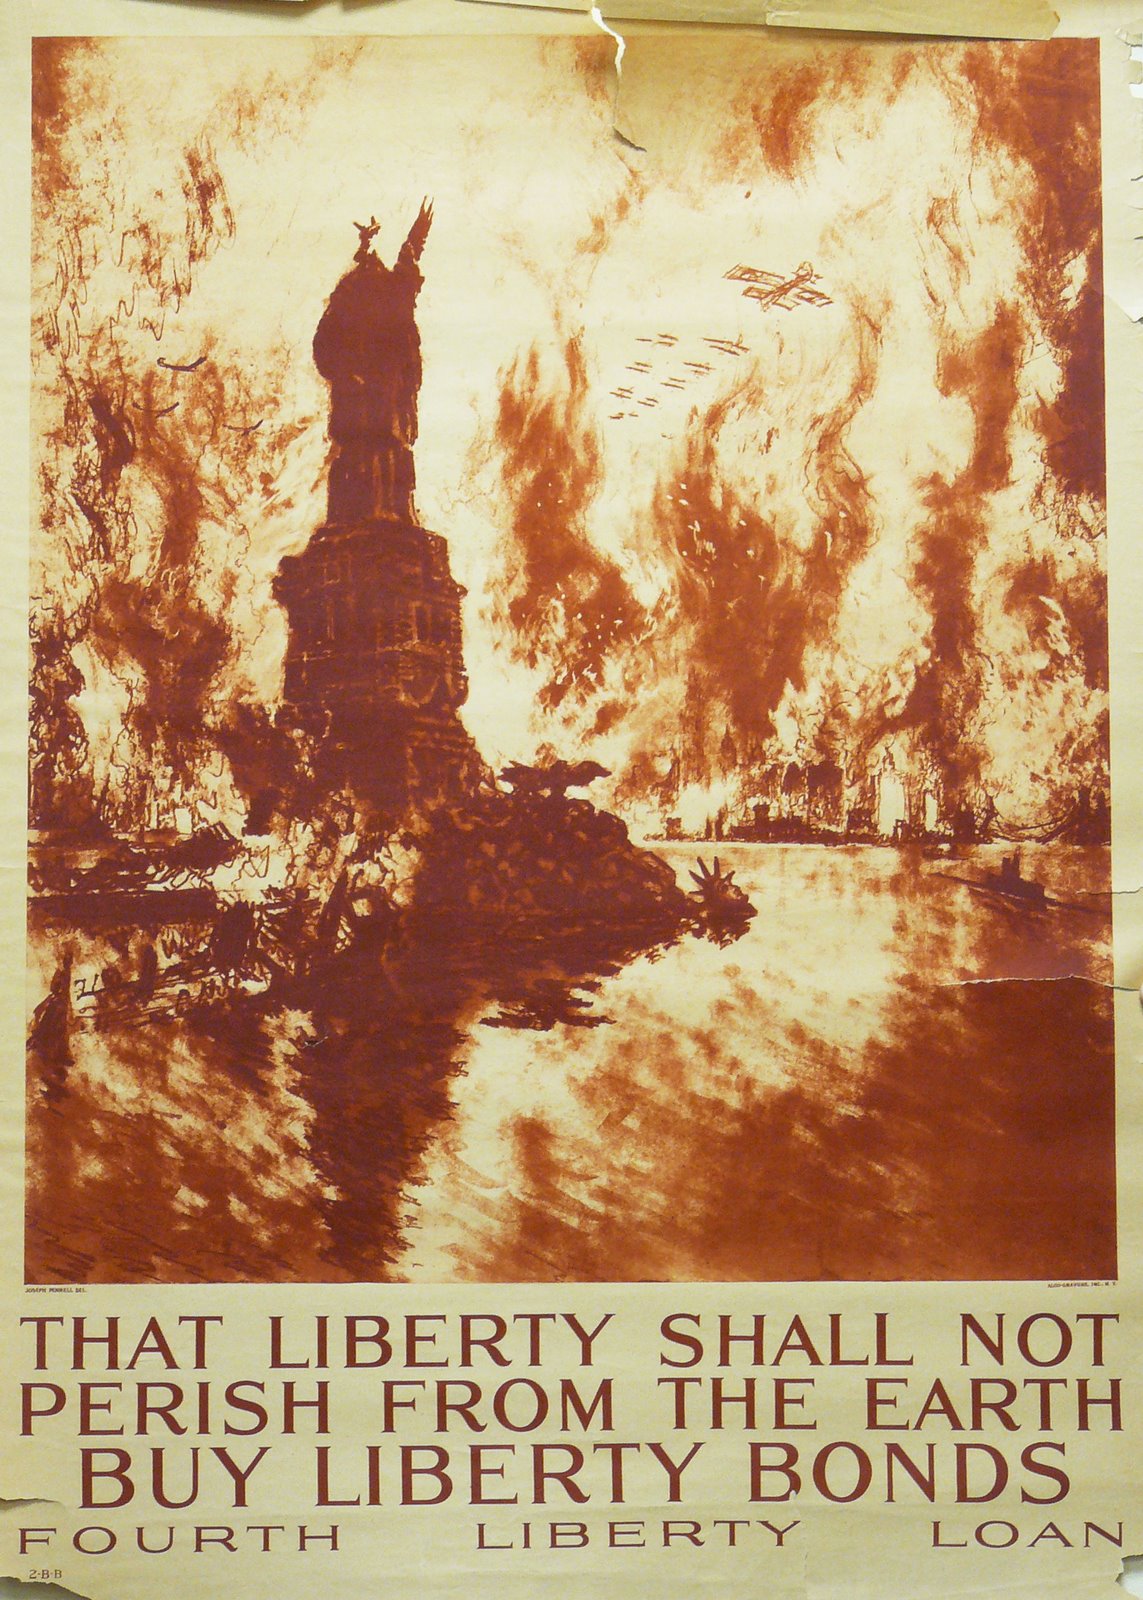 A beheaded Liberty statues consumed by a background of fire, text: THAT LIBERTY SHALL NOT PERISH FROM THE EARTH BUY LIBERTY BONDS FOURTH LIBERTY LOAN